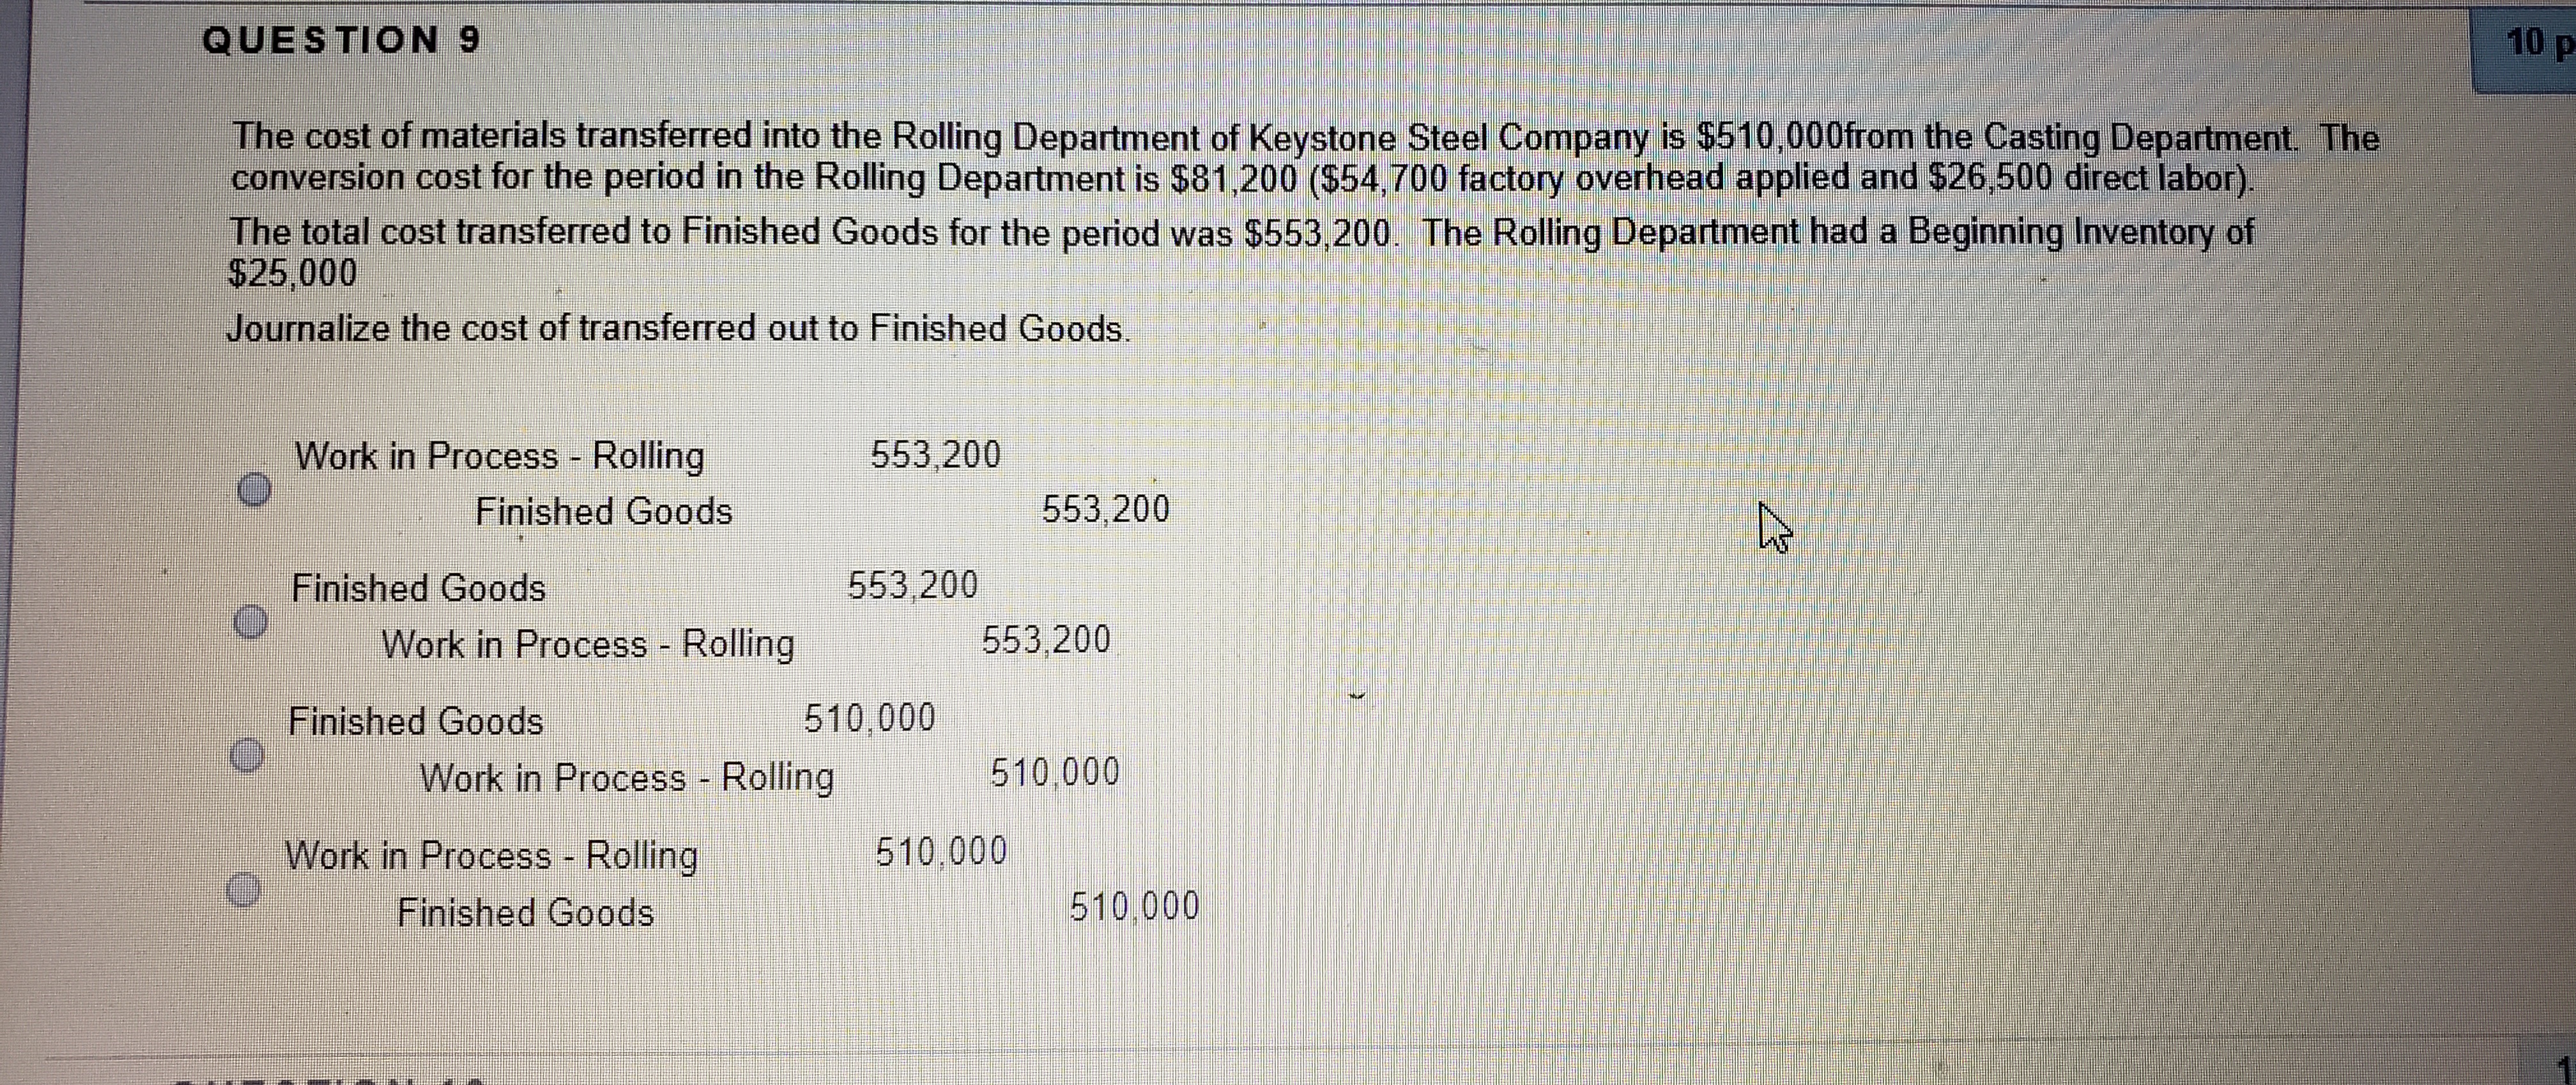 QUESTION 9
10 p
The cost of materials transferred into the Rolling Department of Keystone Steel Company is $510,000from the Casting Department The
conversion cost for the period in the Rolling Department is $81,200 ($54,700 factory overhead applied and $26,500 direct labor).
The total cost transferred to Finished Goods for the period was $553,200. The Rolling Department had a Beginning Inventory of
$25,000
Journalize the cost of transferred out to Finished Goods.
Work in Process - Rolling
553,200
Finished Goods
553,200
Finished Goods
553,200
Work in Process - Rolling
553,200
Finished Goods
510,000
Work in Process - Rolling
510,000
Work in Process Rolling
510,000
Finished Goods
510,000
